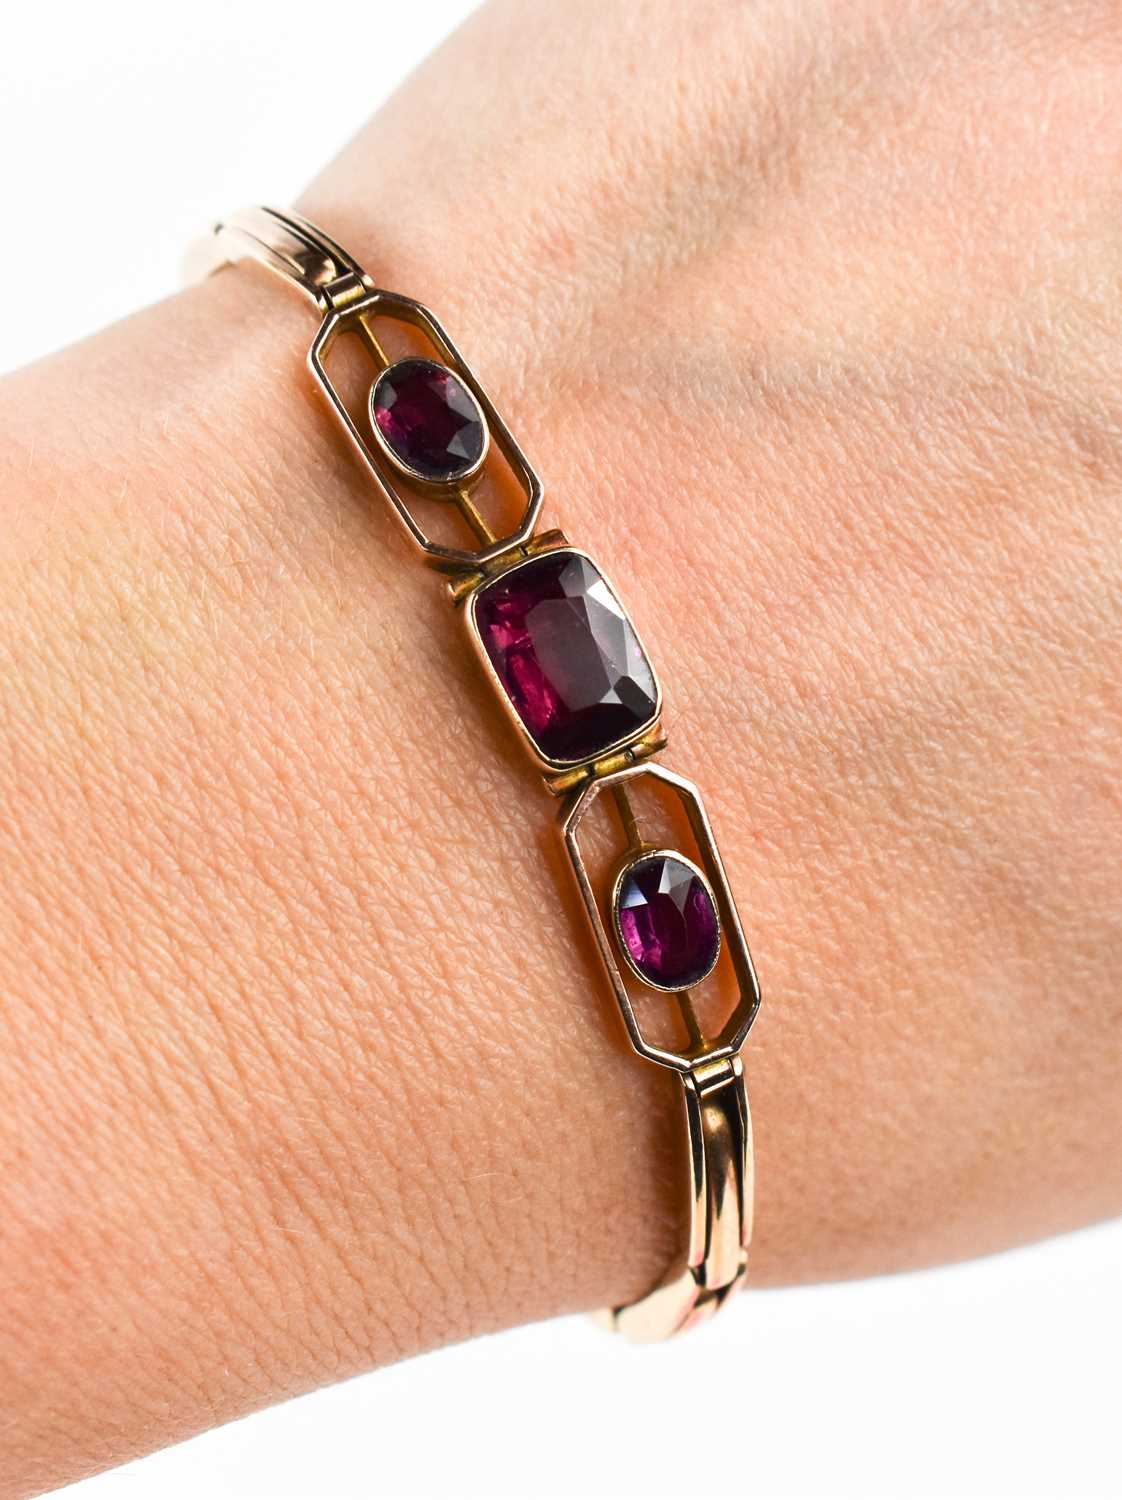 A 9ct rose gold bracelet set with three amethysts, the central emerald cut amethyst of approximately